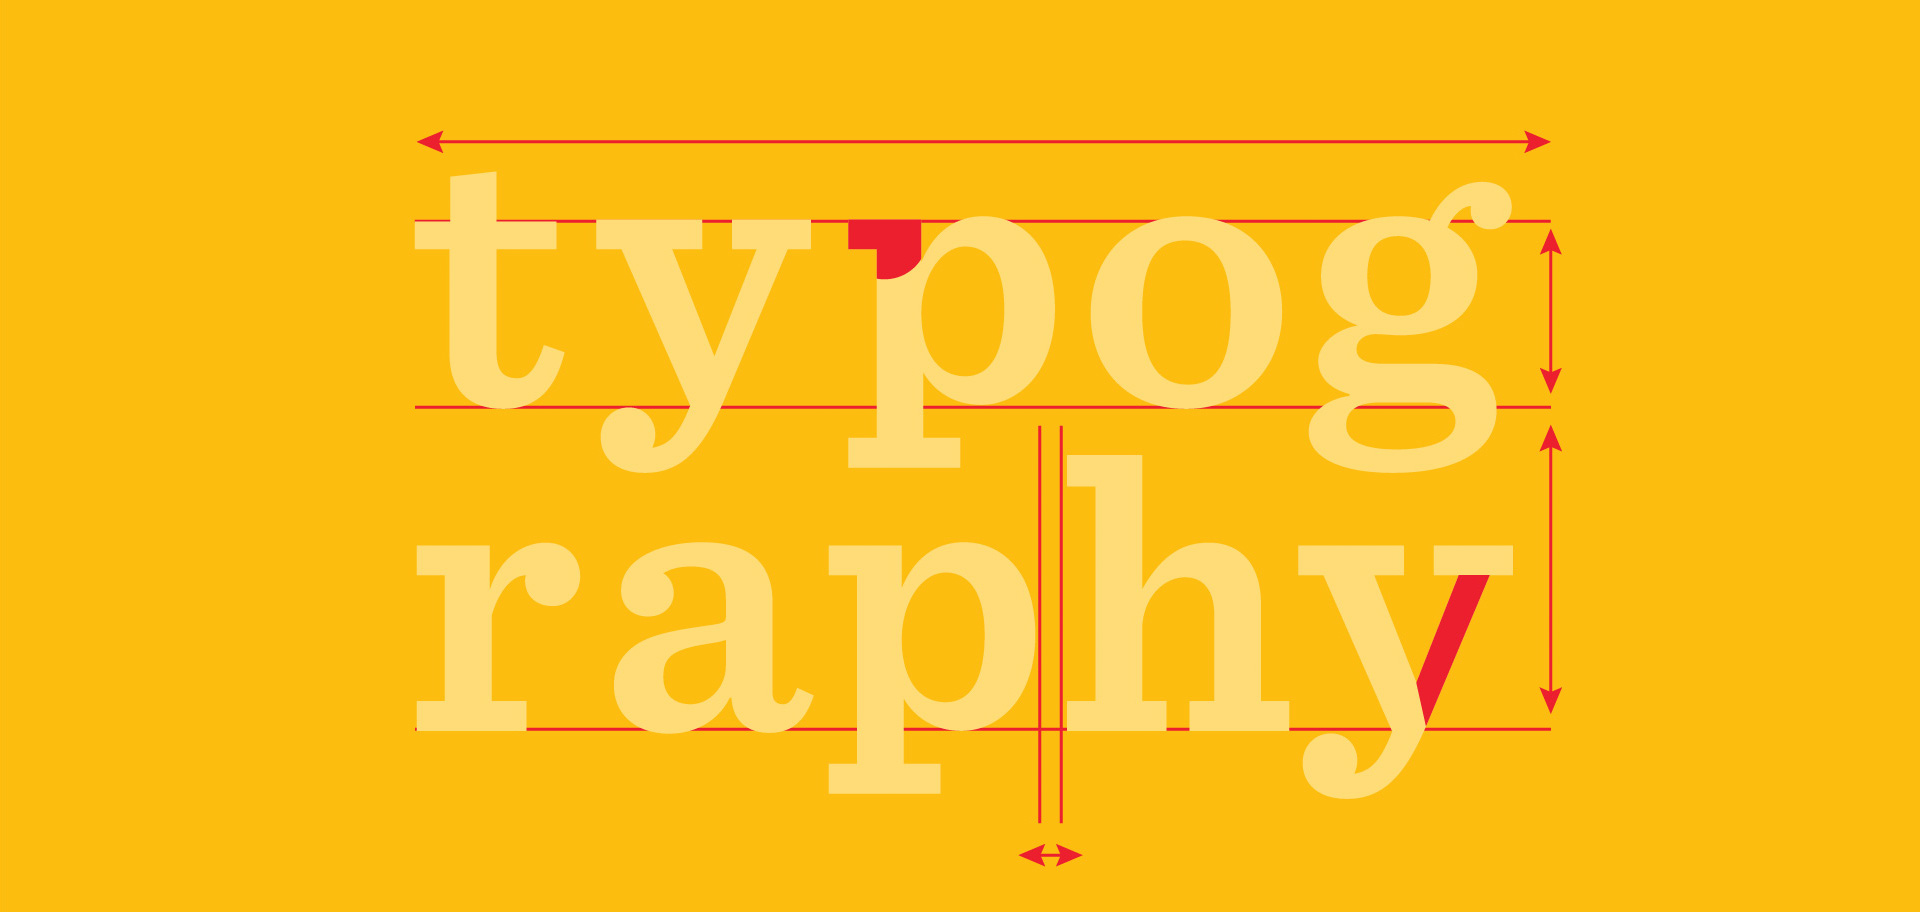 Typography Explained: A Quick Guide to Font Terminology